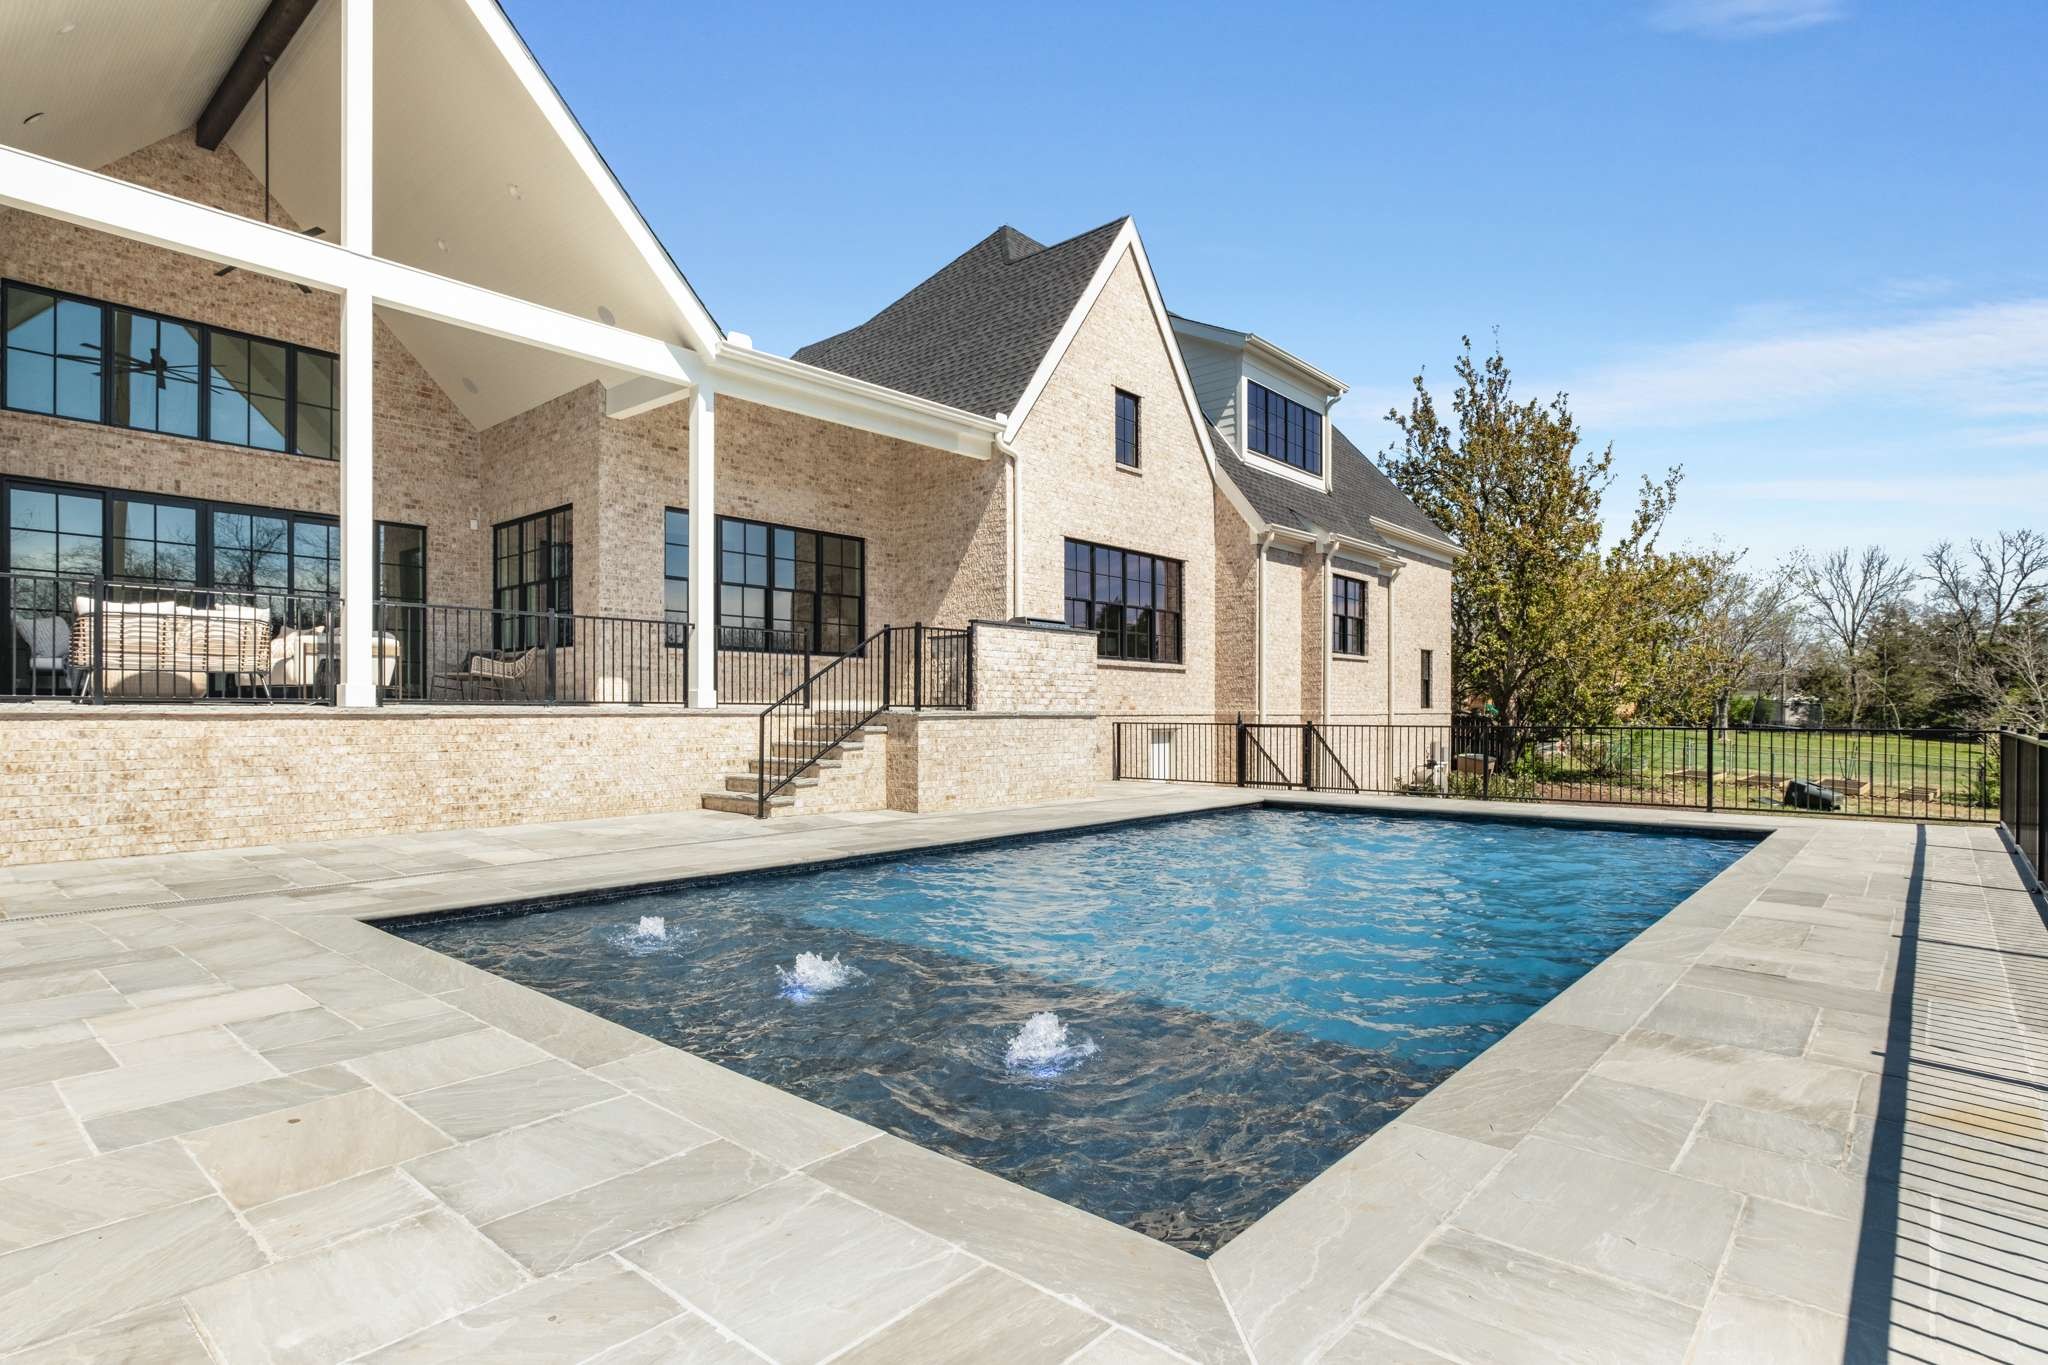 a view of a house with swimming pool